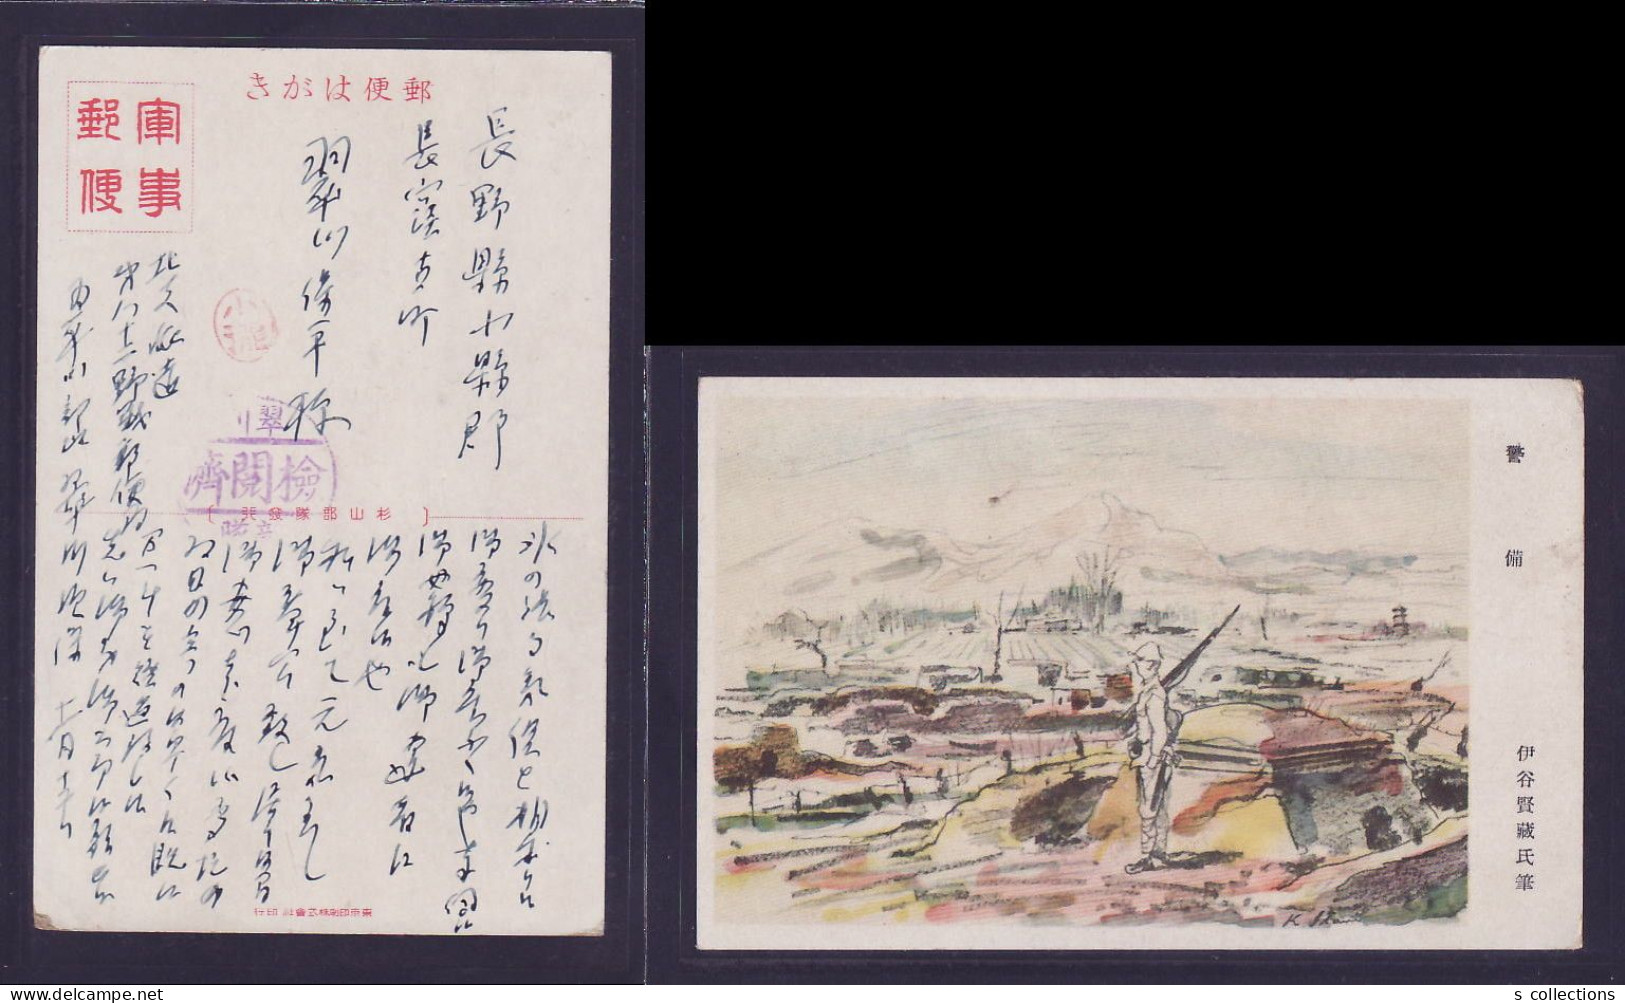 JAPAN WWII Military Local Picture Postcard North China Japanese Soldier WW2 Chine WW2 Japon Gippone - 1941-45 Noord-China